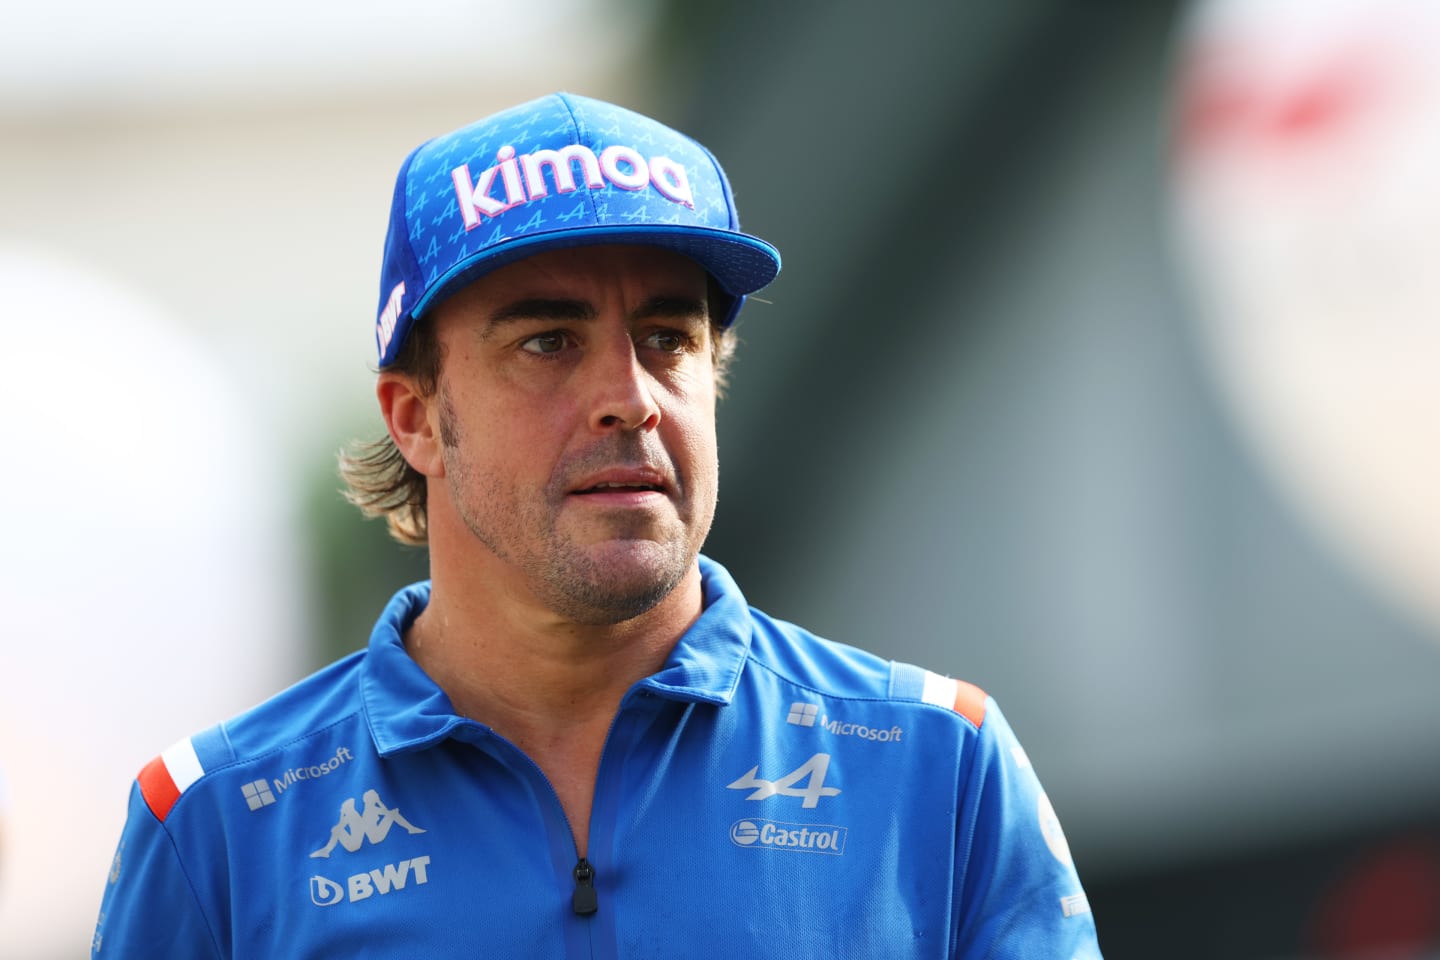 SINGAPORE, SINGAPORE - SEPTEMBER 30: Fernando Alonso of Spain and Alpine F1 walks in the Paddock prior to practice ahead of the F1 Grand Prix of Singapore at Marina Bay Street Circuit on September 30, 2022 in Singapore, Singapore. (Photo by Clive Rose/Getty Images,)